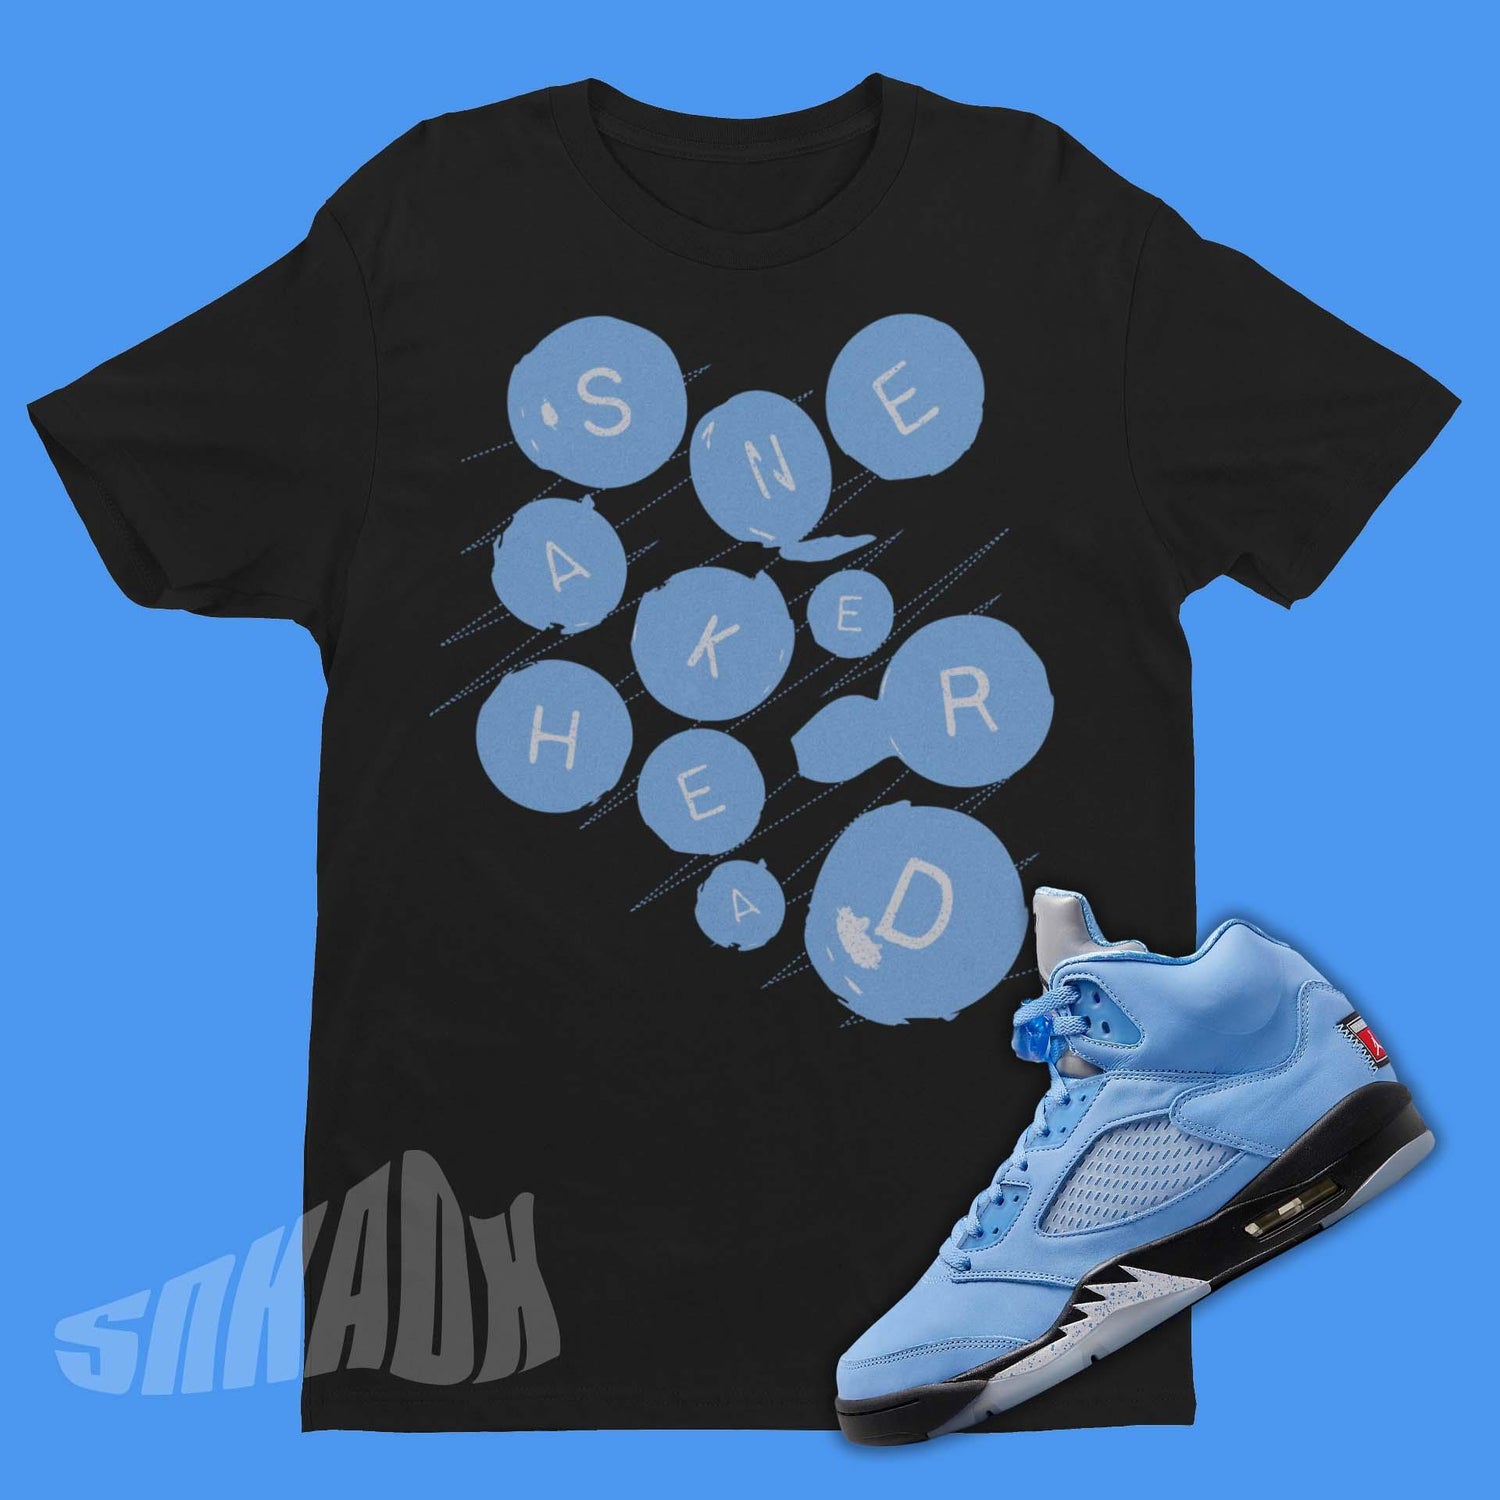 AJ5 UNC - What's your opinion on them? : r/Sneakers